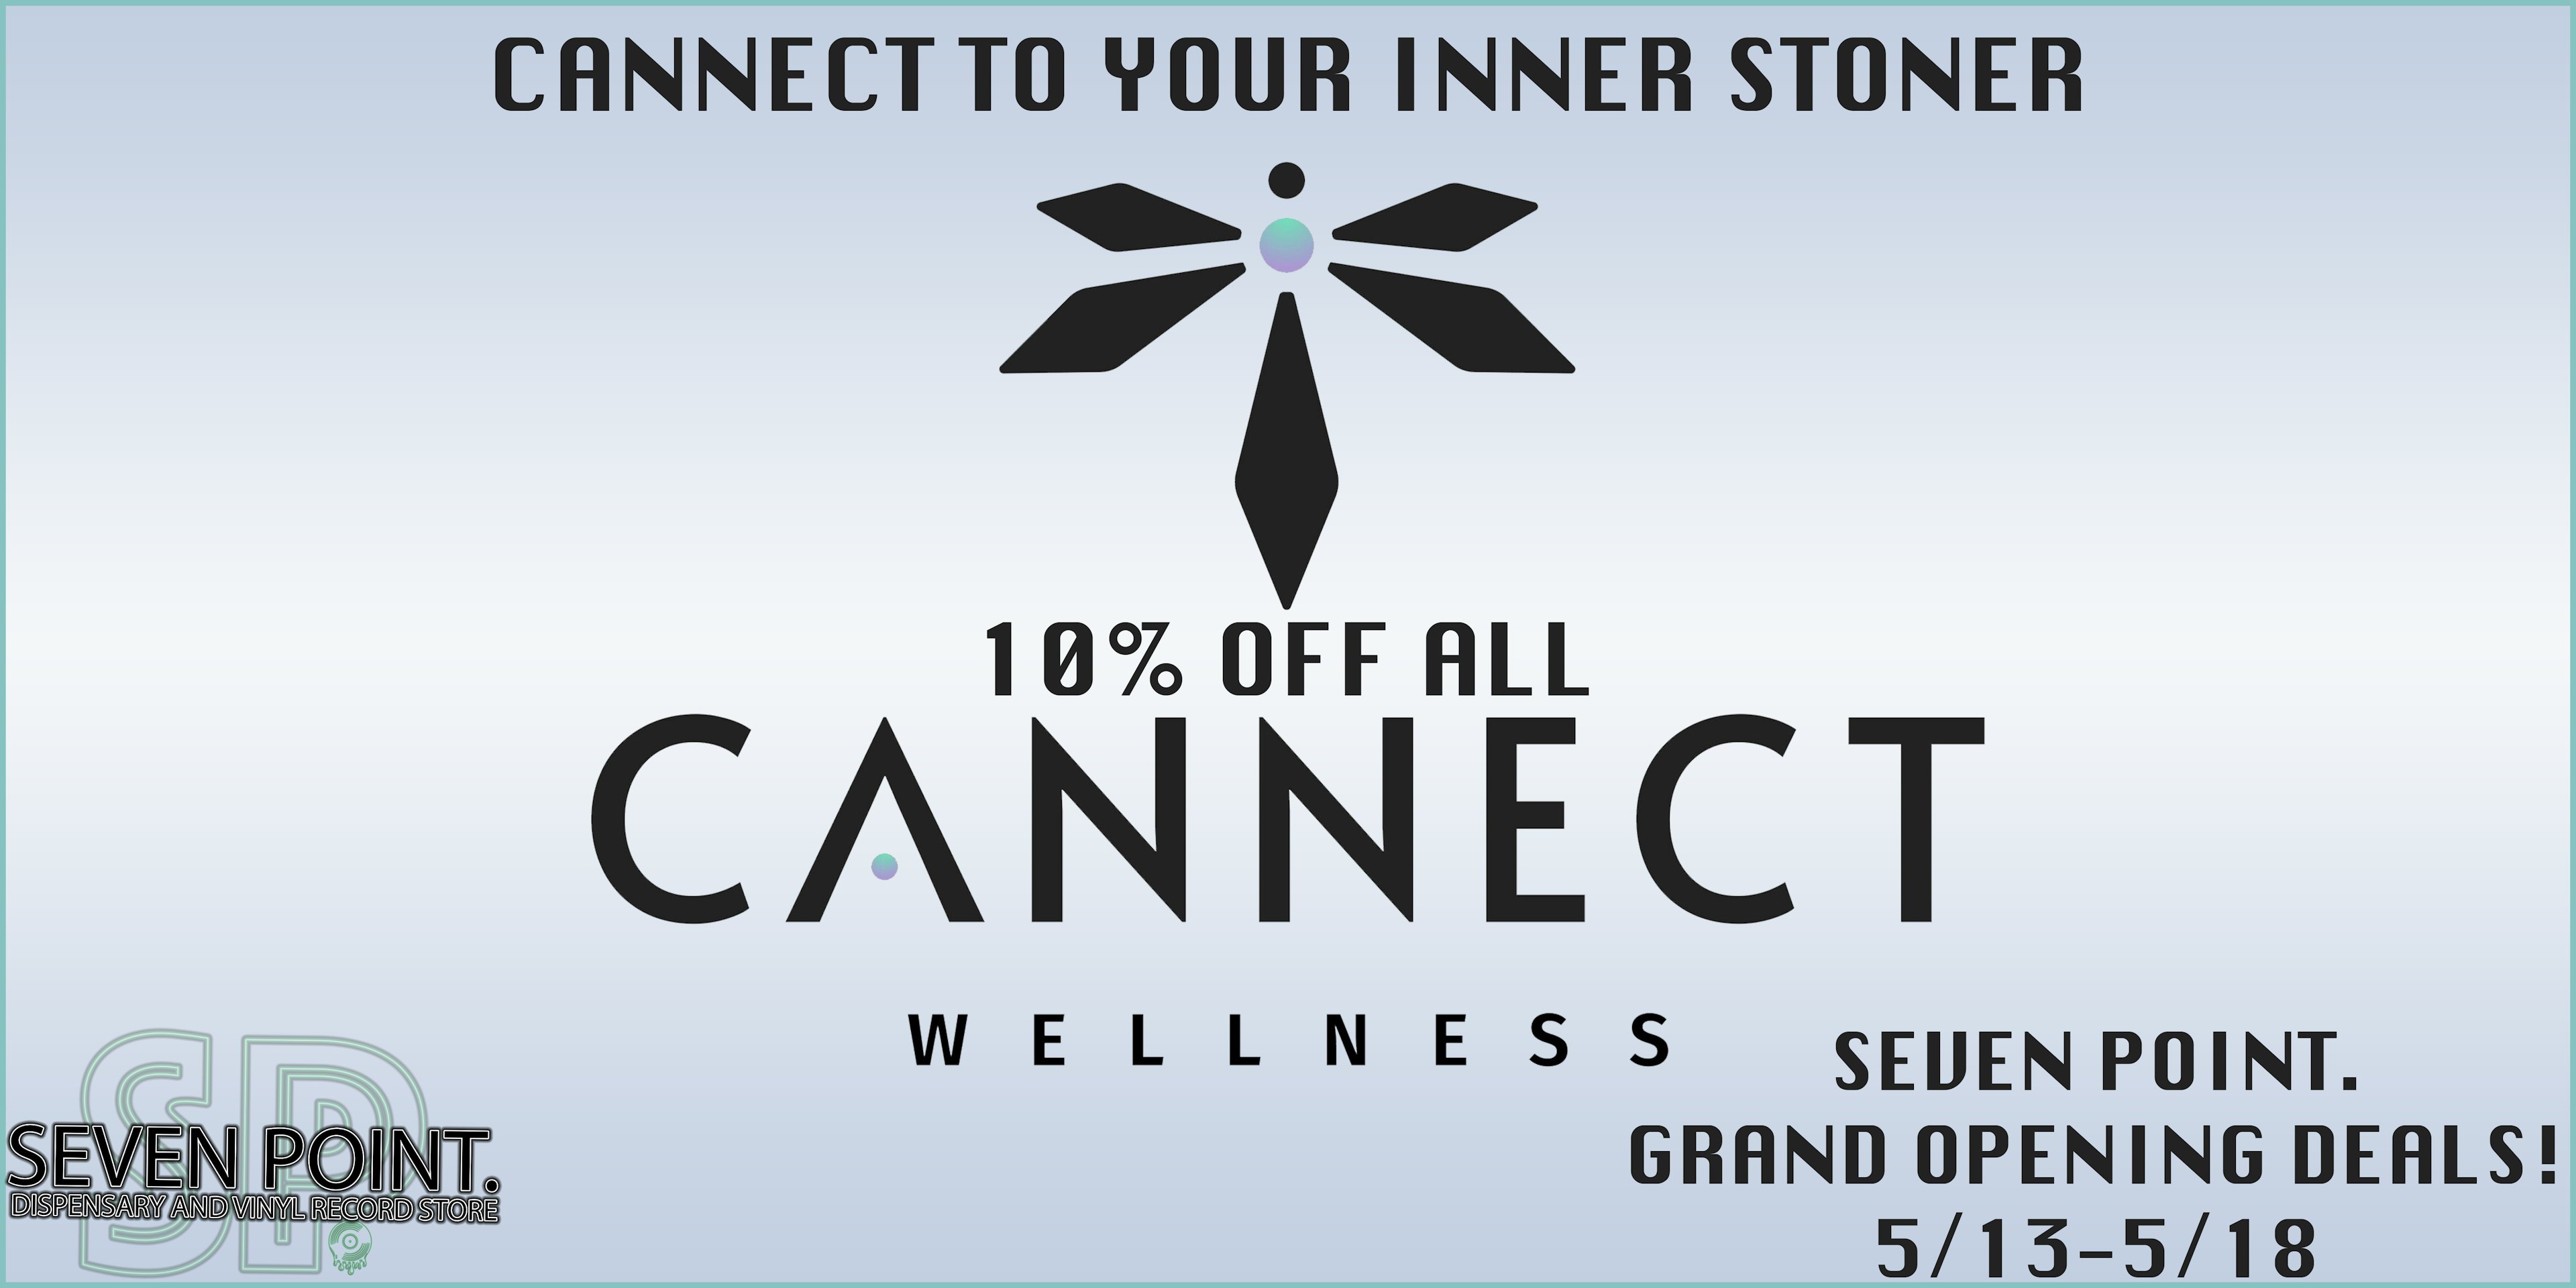 10% OFF CANNECT